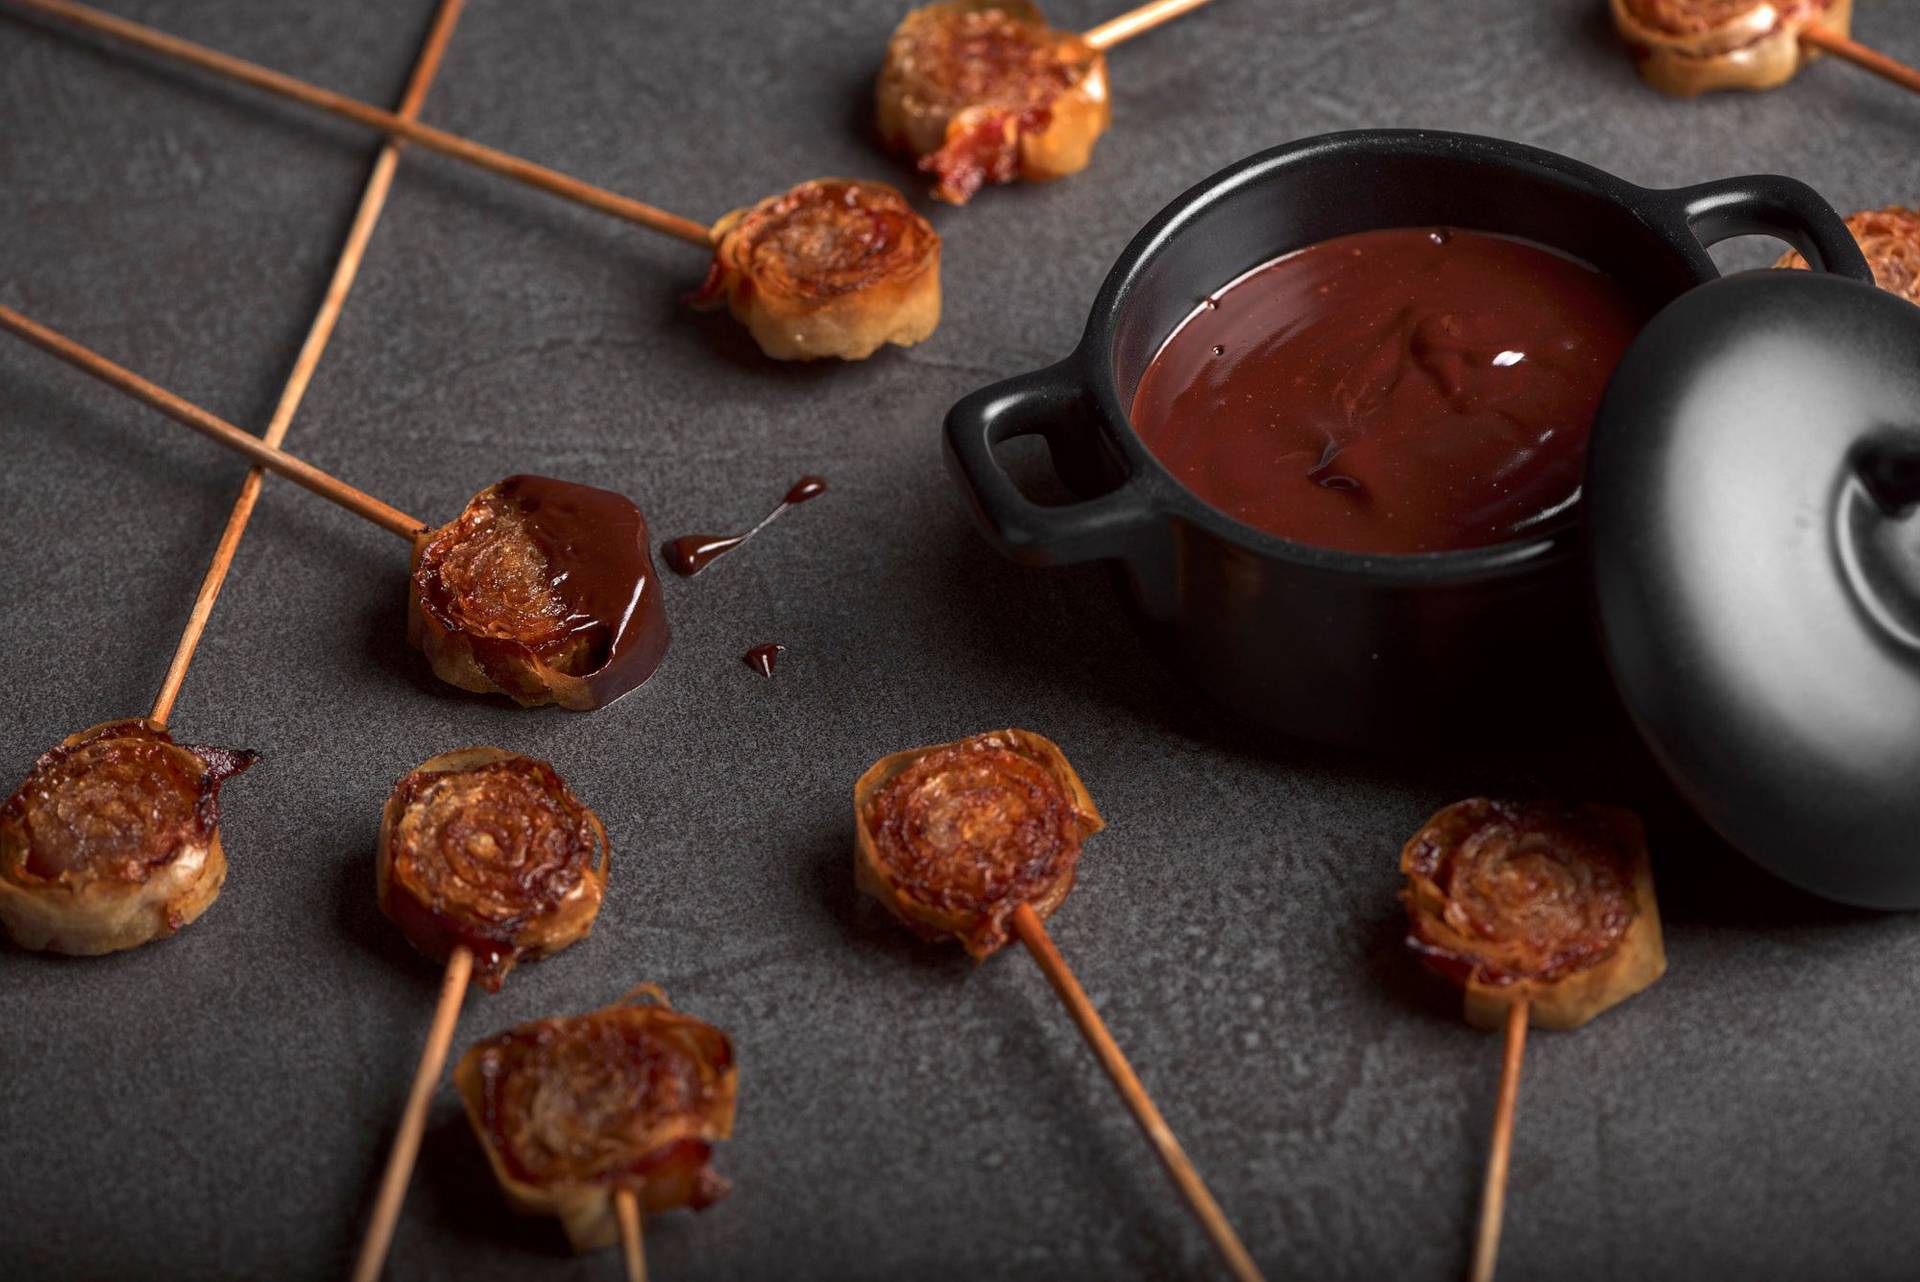 bacon and cinnamon lollipops with dark chocolate on a sapienstone top